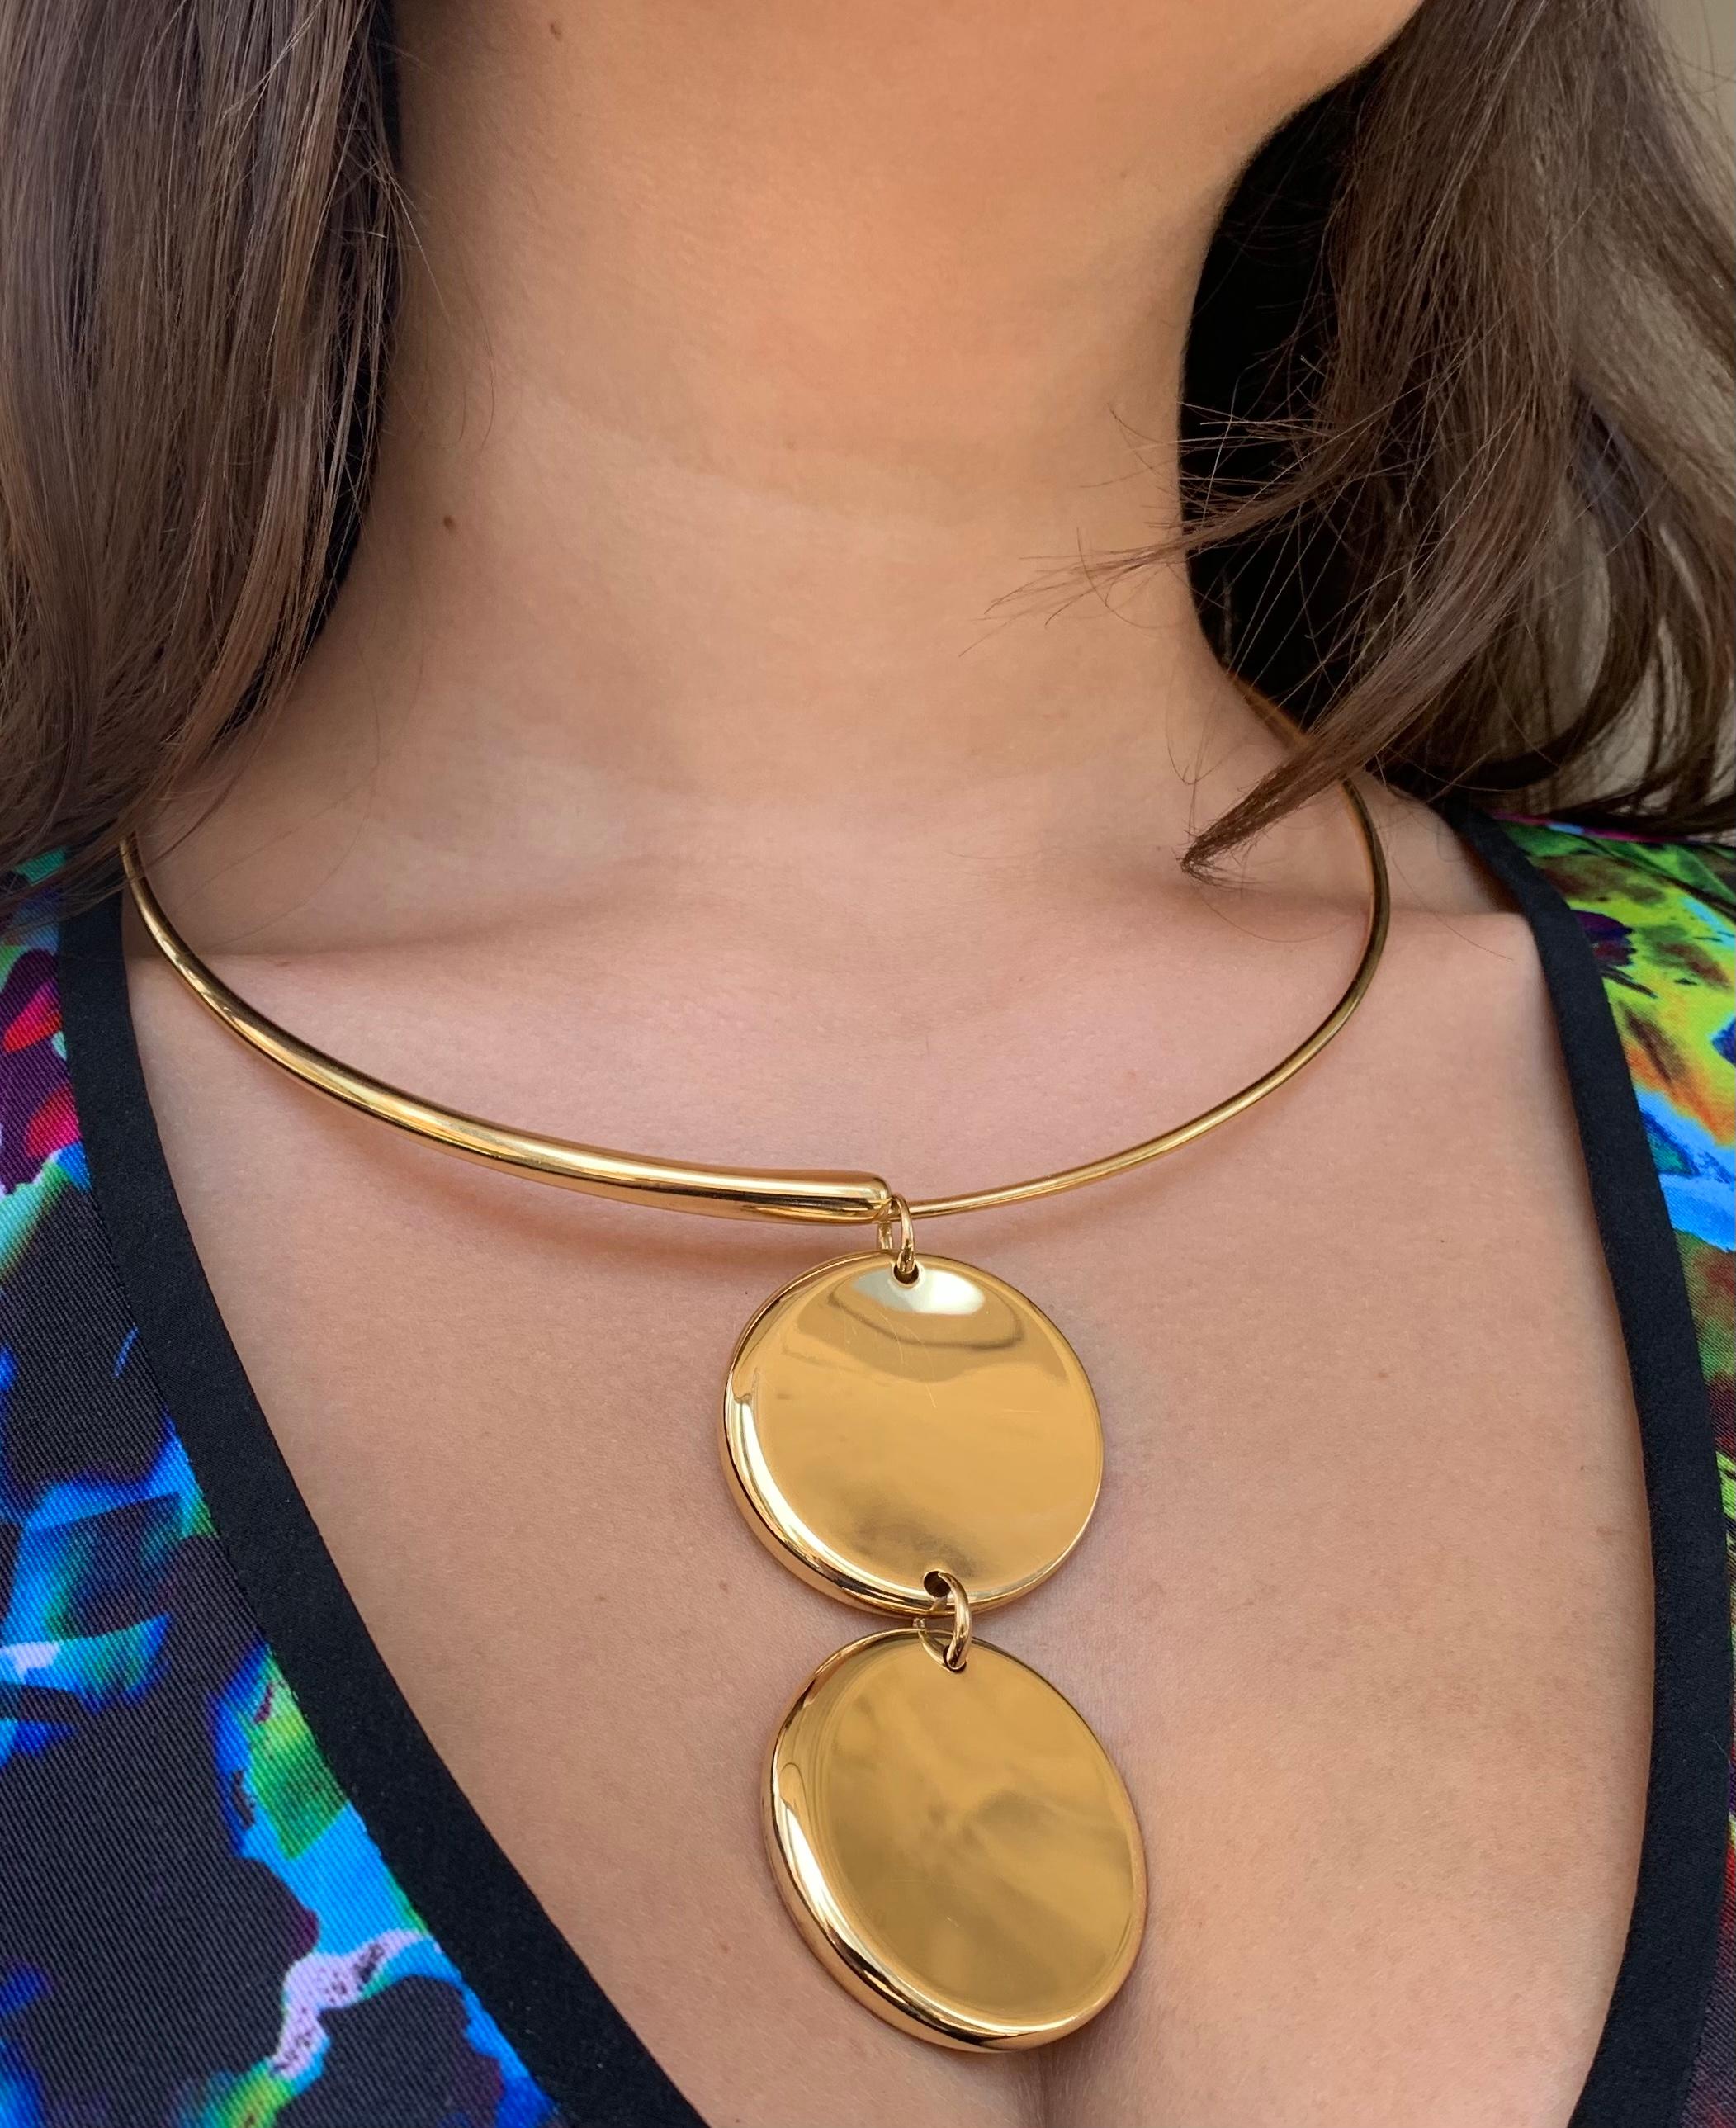 Spectacular and substantial 18K yellow gold Georg Jensen necklace designed by the renown American British-based designer Jacqueline Rabun in 2004. 
Jacqueline Rabun's Black Love Collar Necklace is included in Sotheby's Brilliant & Black: A Jewelry